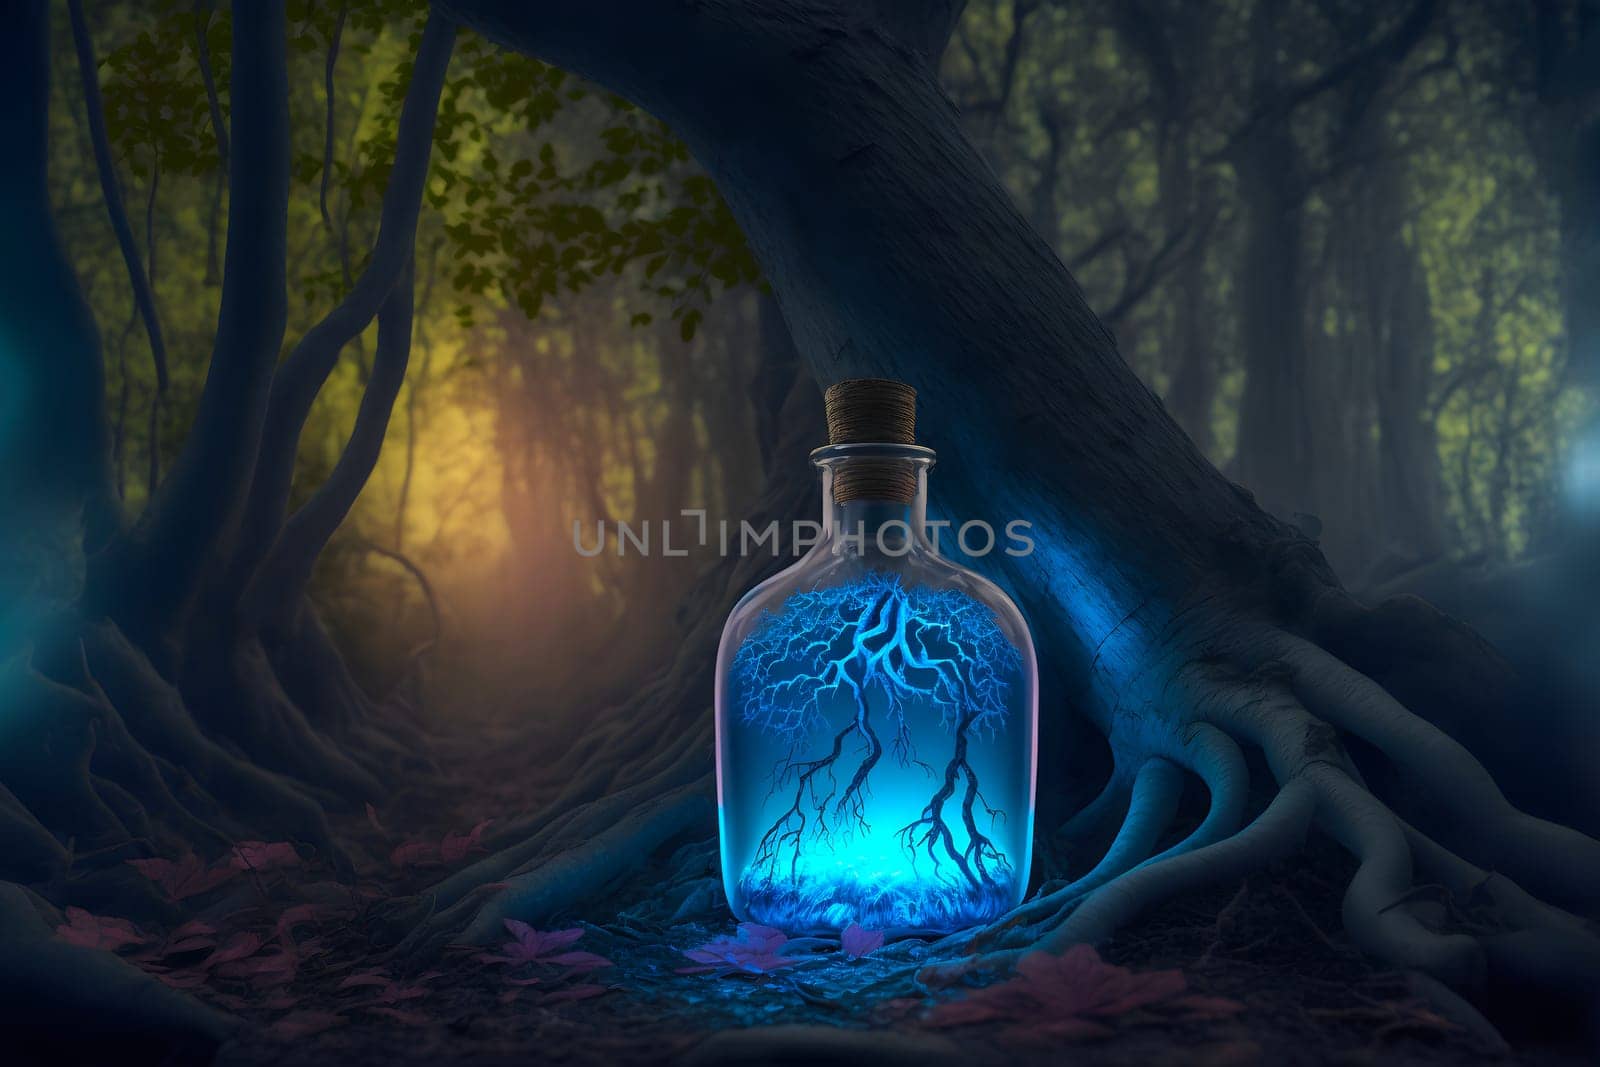 glowing potion bottle on night forest ground, neural network generated art. Digitally generated image. Not based on any actual person, scene or pattern.